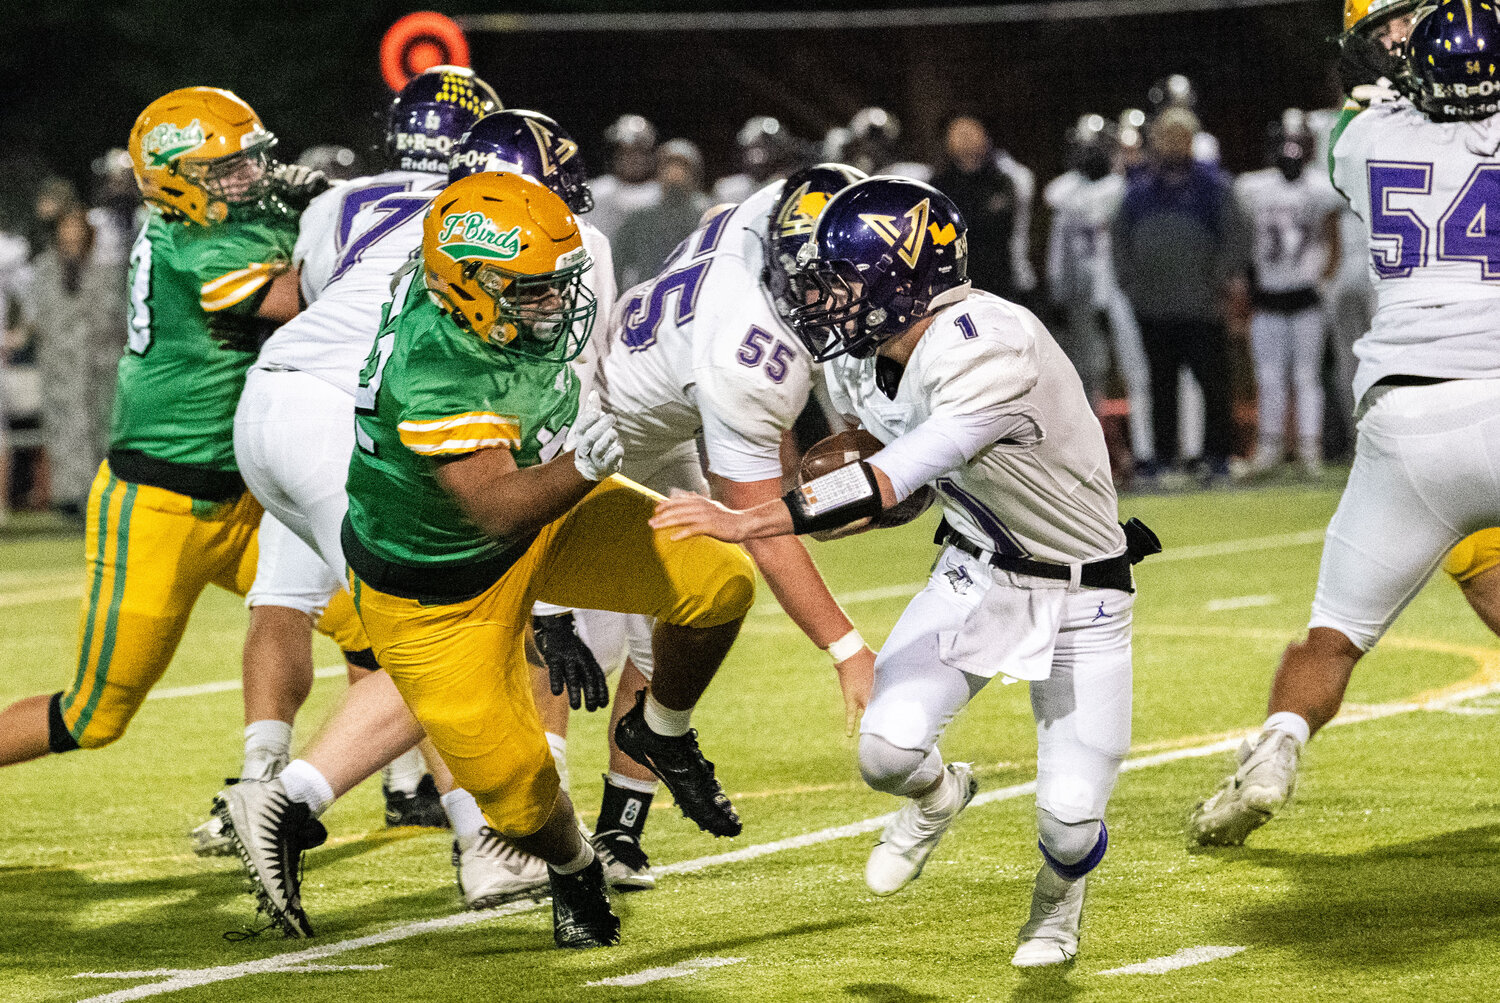 Tumwater’s Malijah Tucker faces off with North Kitsap’s Cole Edwards before a successful sack during a 2A state semifinal game on Saturday.